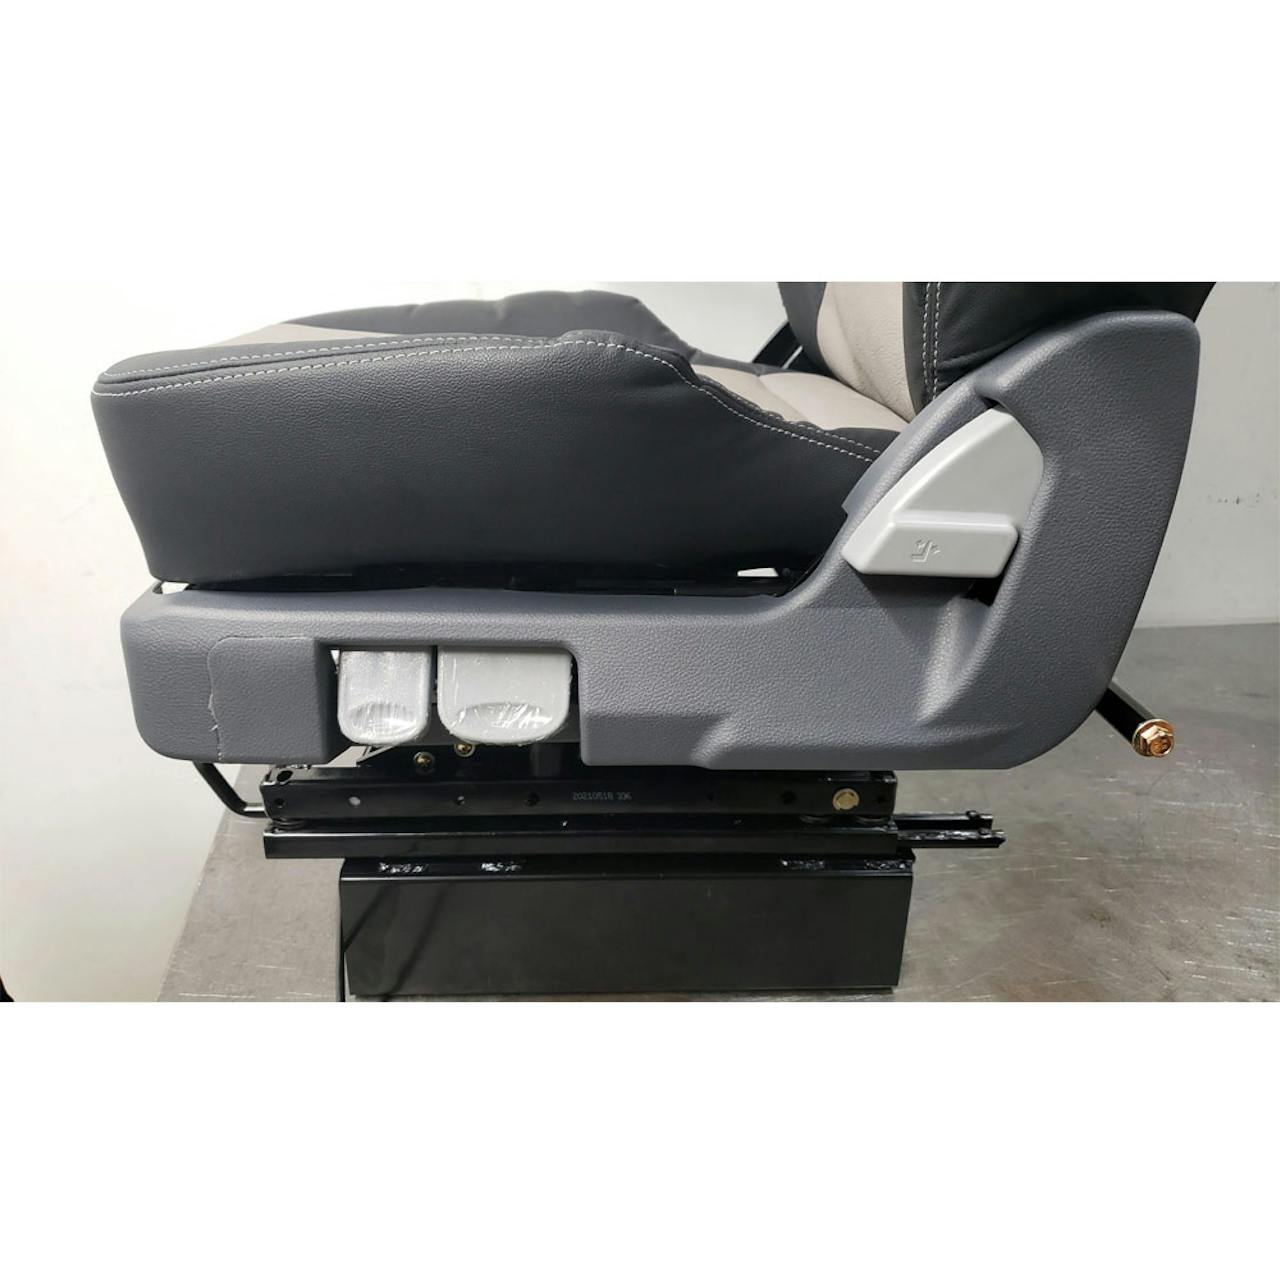 https://raneys-cdn11.imgix.net/images/stencil/original/products/207414/182884/68380-tc200-series-two-tone-leather-truck-seat-base__17833.1659014163.jpg?auto=compress,format&w=1280